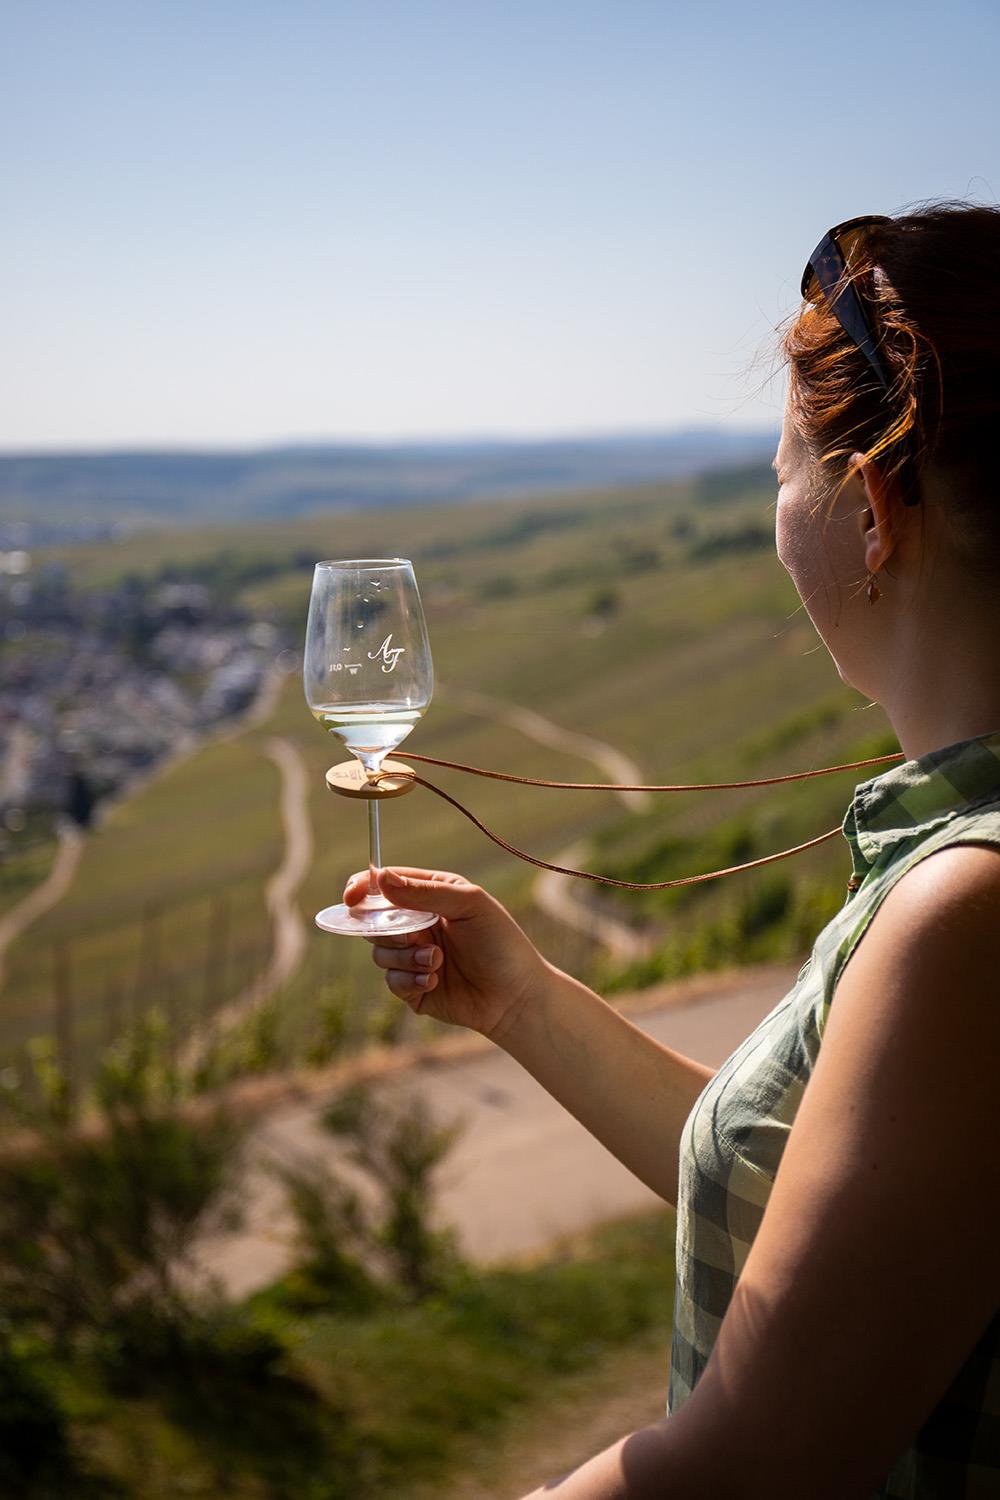 Enjoy the wine and the landscape